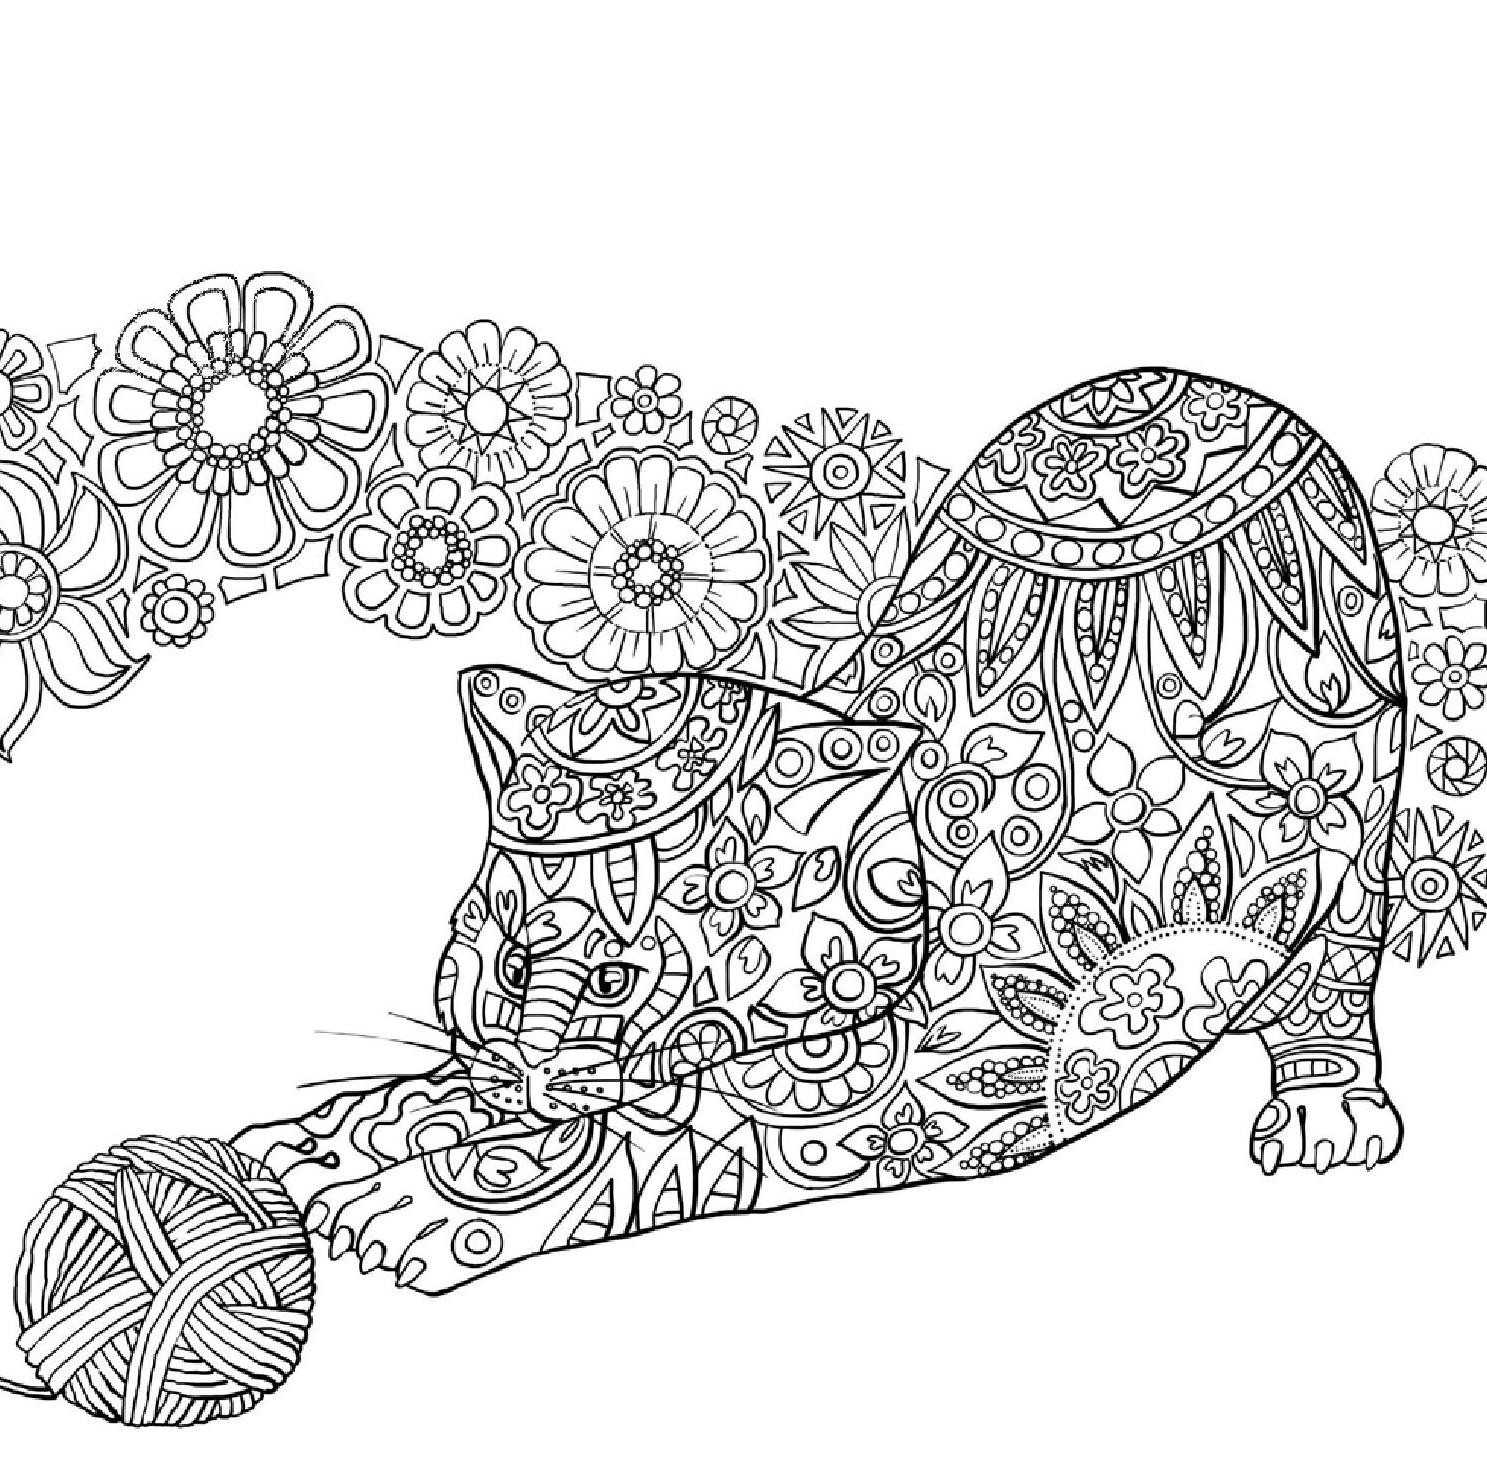 27 Stylish Fish In Flower Vase 2024 free download fish in flower vase of complicated animal coloring pages beautiful cool vases flower vase regarding complicated animal coloring pages beautiful cool vases flower vase coloring page pages flo